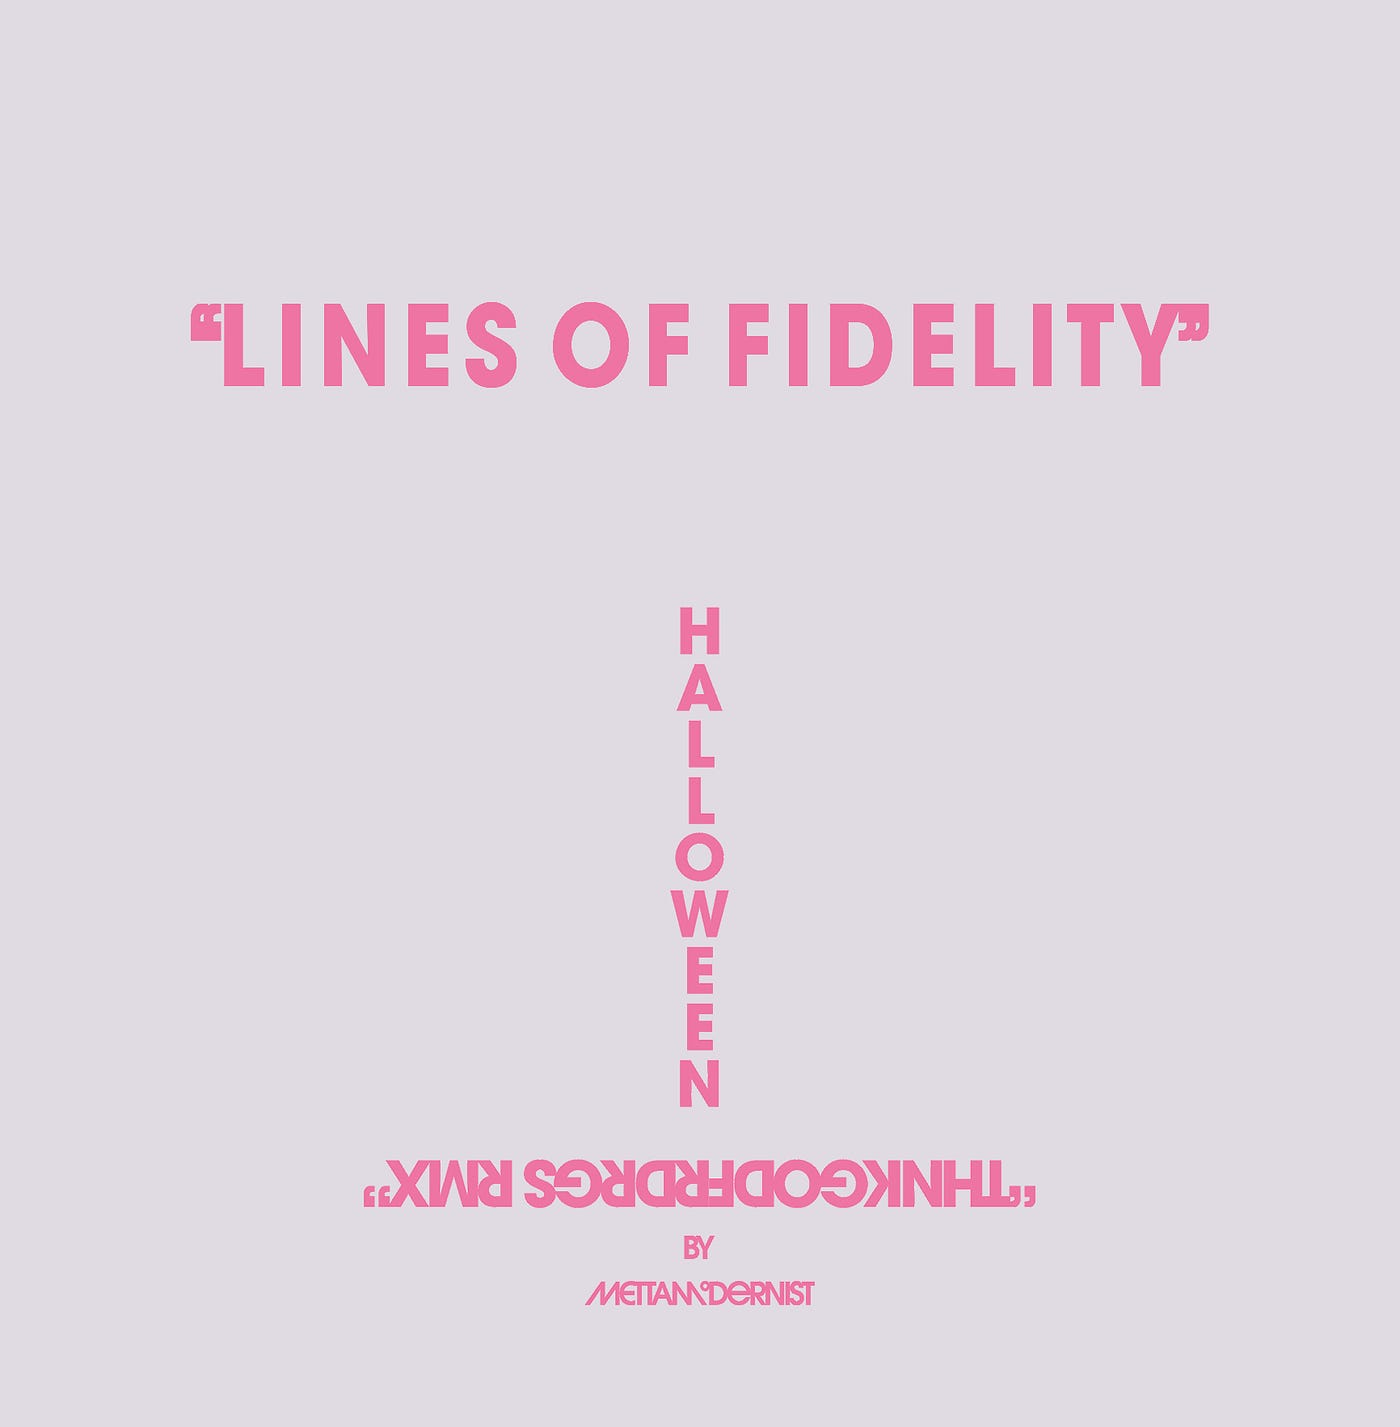 I-SOLO — “LINES OF FIDELITY”